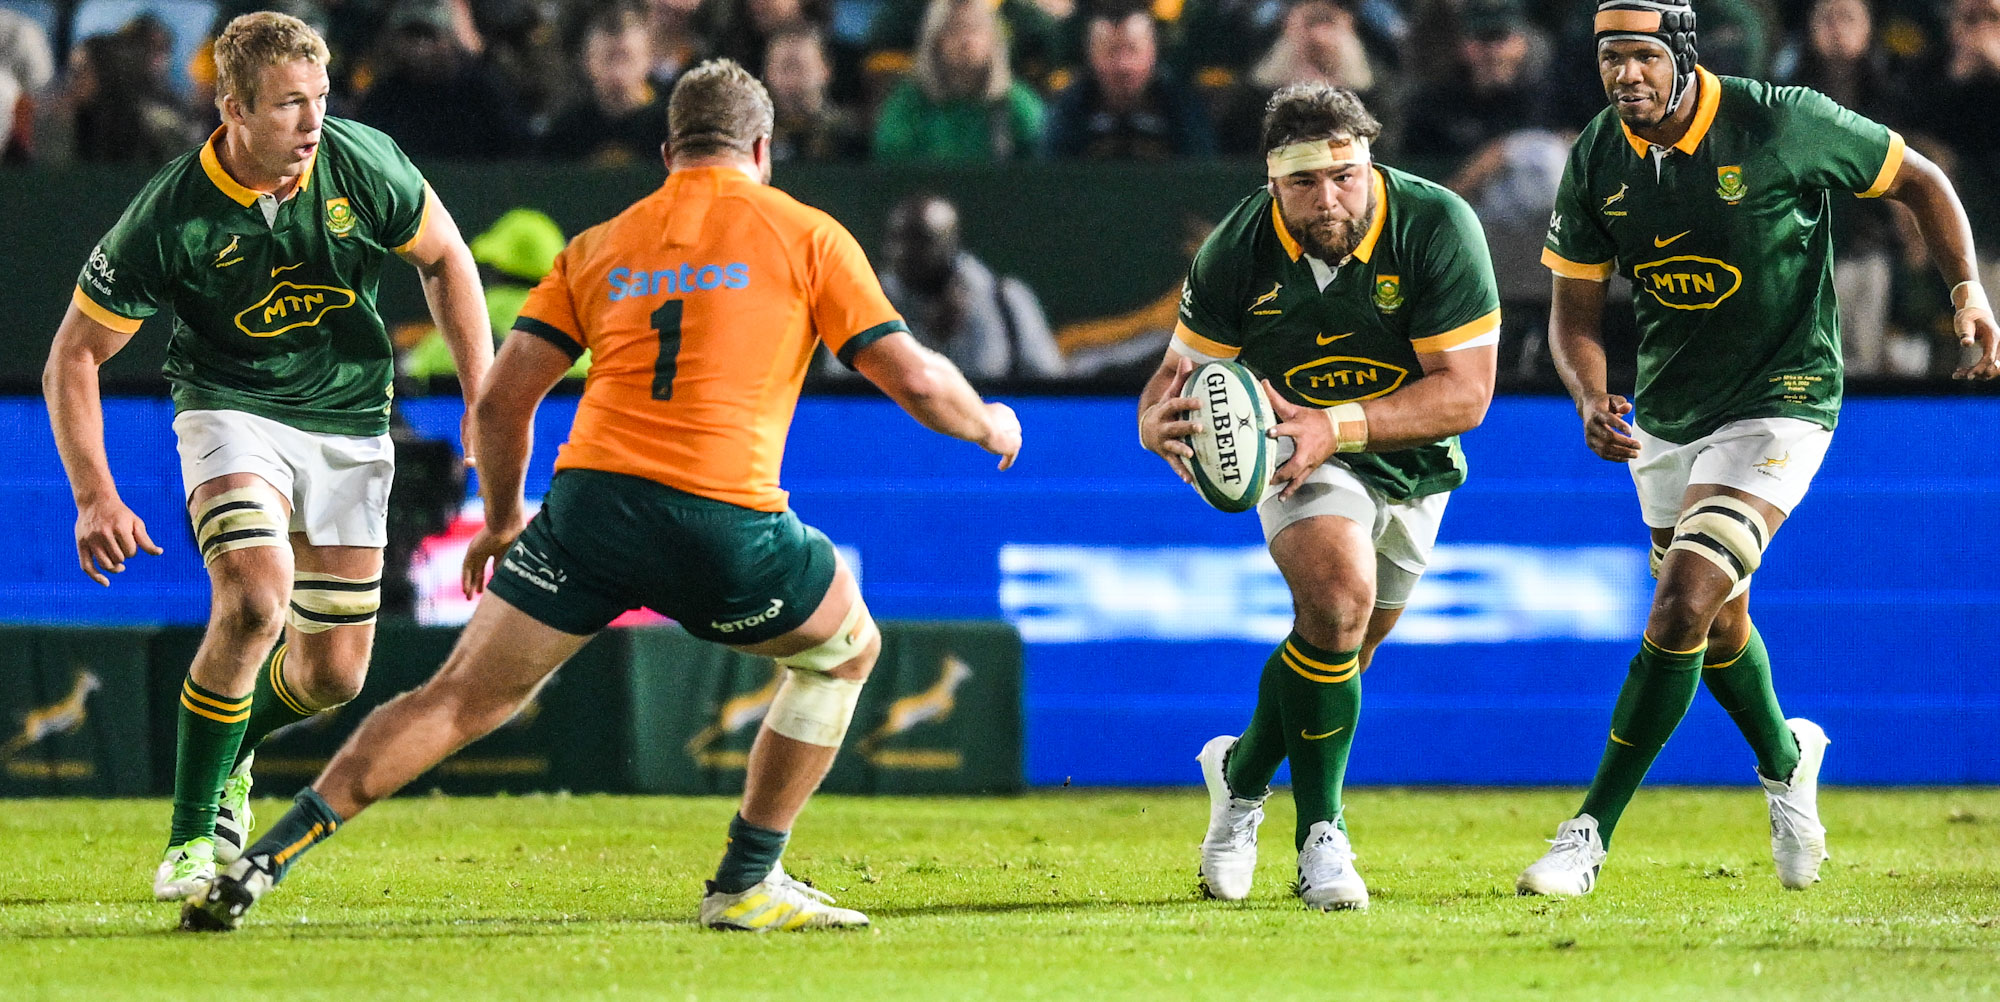 Frans Malherbe on the charge against the Wallabies in Pretoria.